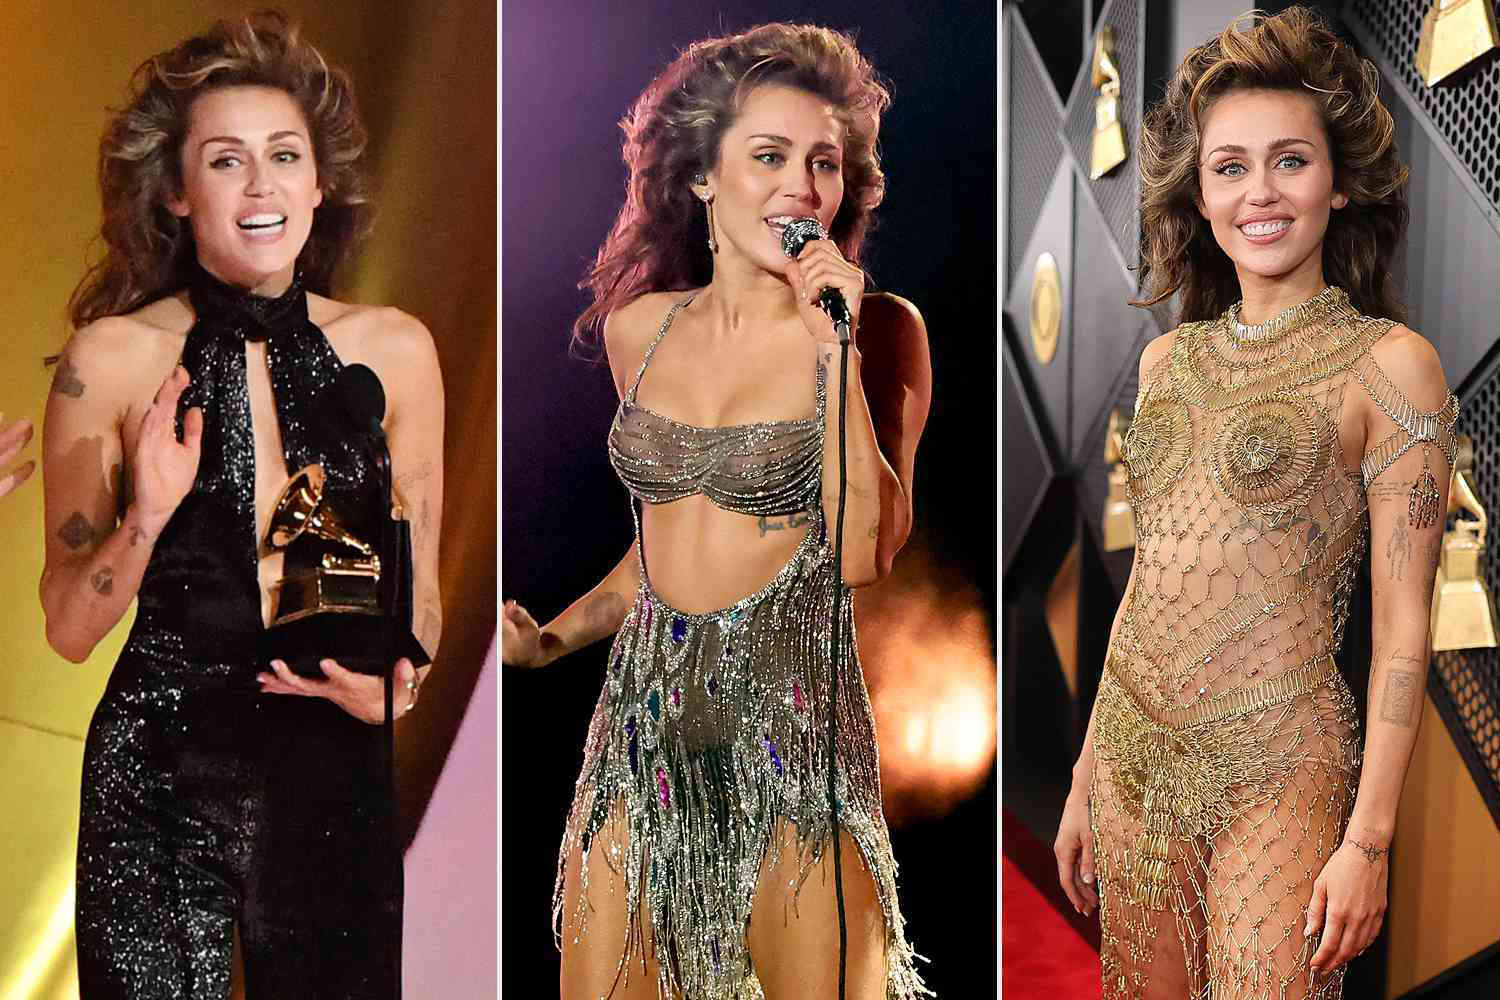 See Miley Cyrus' Many Outfit Changes as She Reveals She Forgot Her Underwear in Final Dress